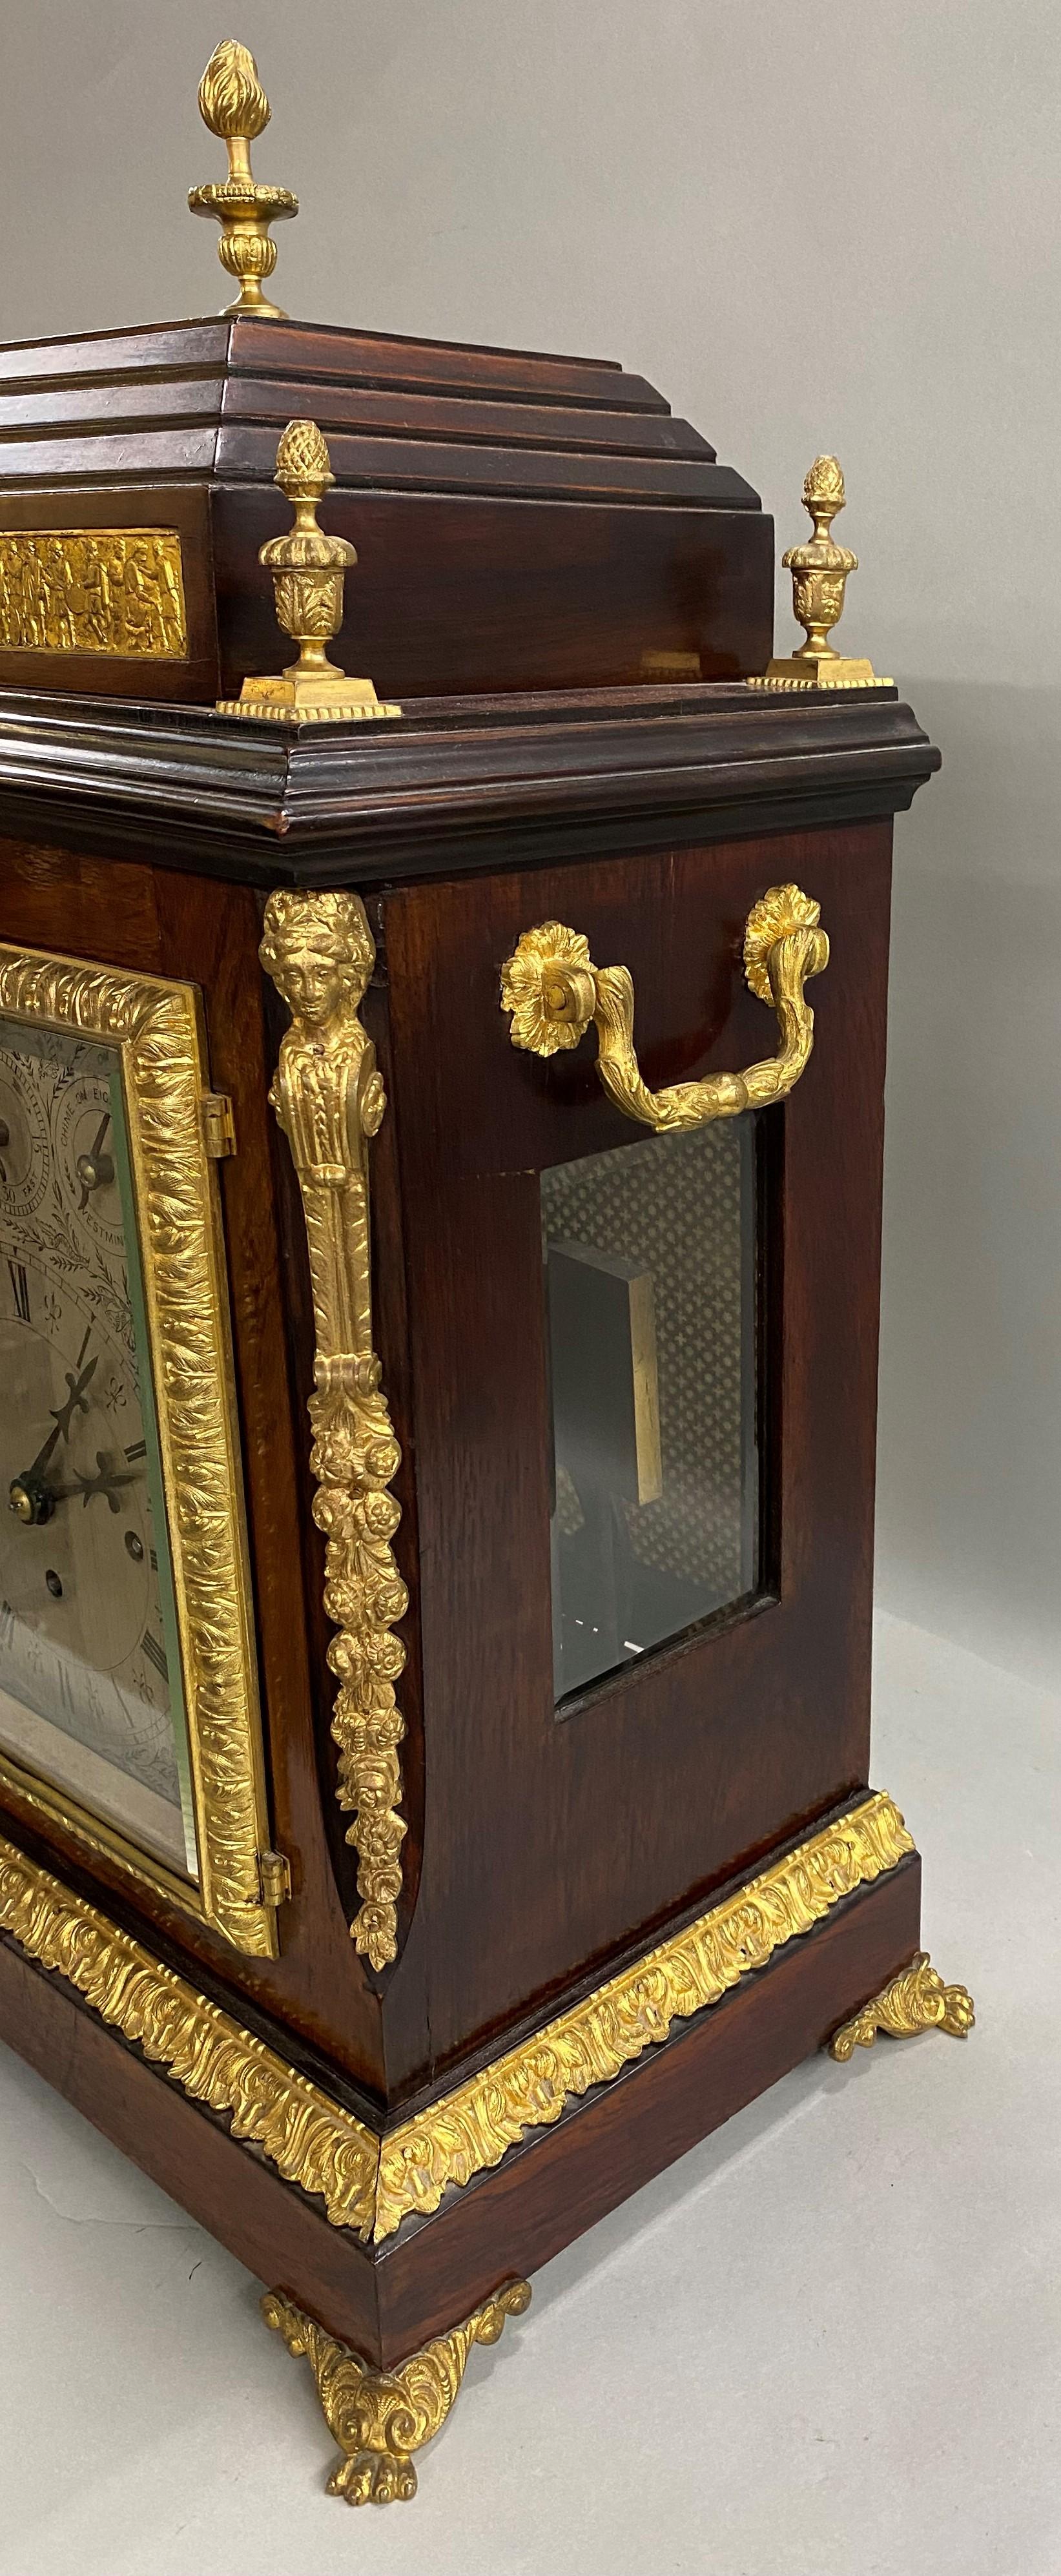 A fine example of an English ormolu mounted rosewood, musical bracket or mantle lock with manufacturer’s label for Camerer, Cuss, & Co, London. This beautiful clock has a silvered dial with Roman numerals, and Westminster chimes with eight bells.